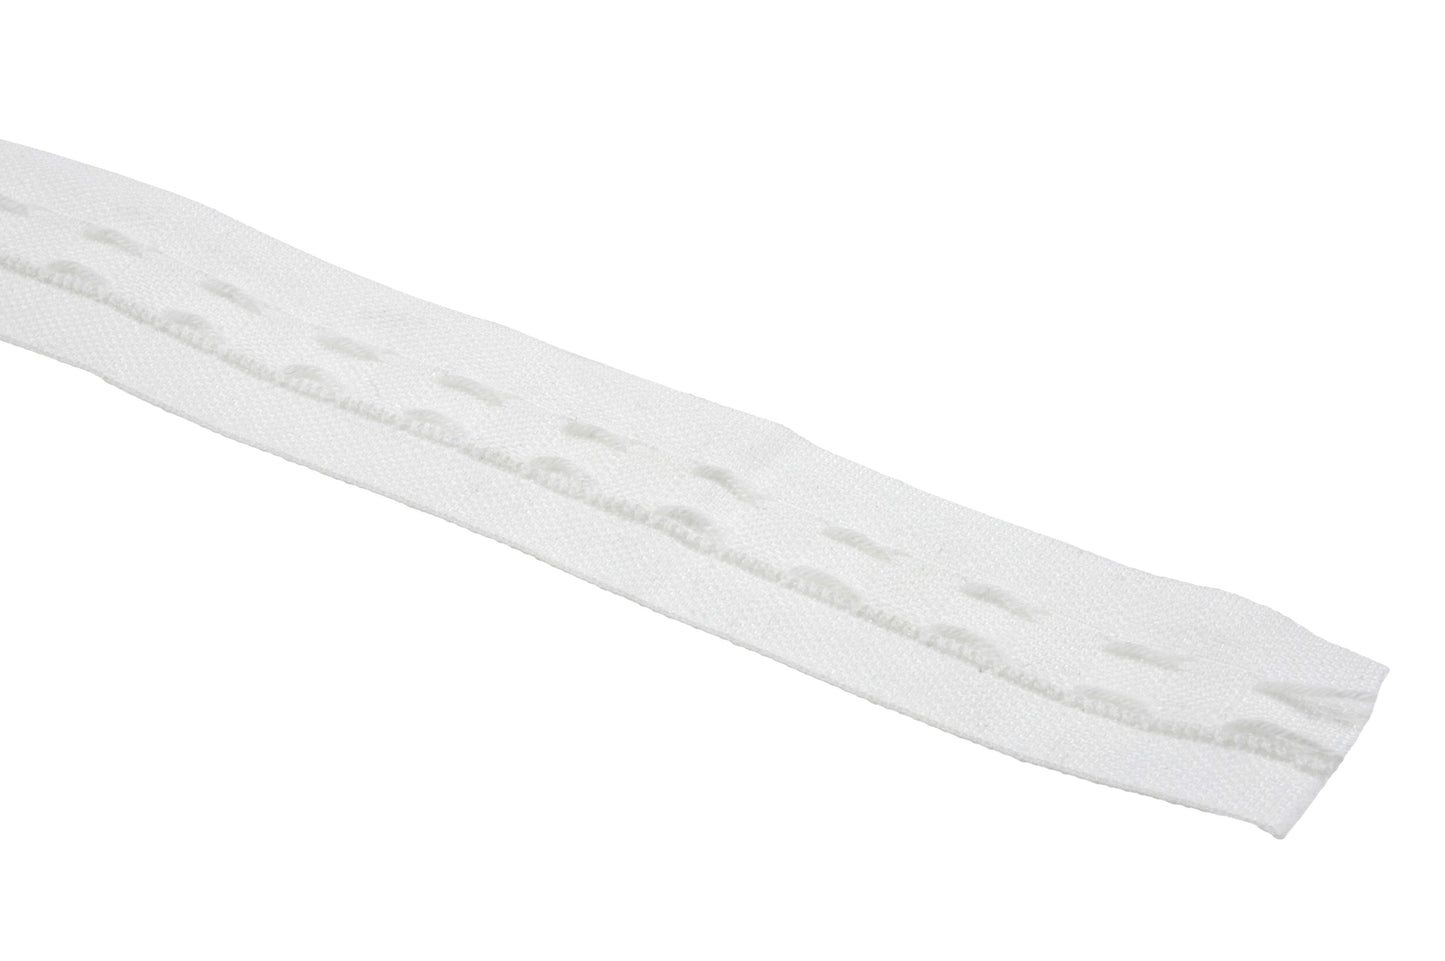 Curtain Tape Woven Pocket Tape White 28mm (1 Inch) Wide Per Metre